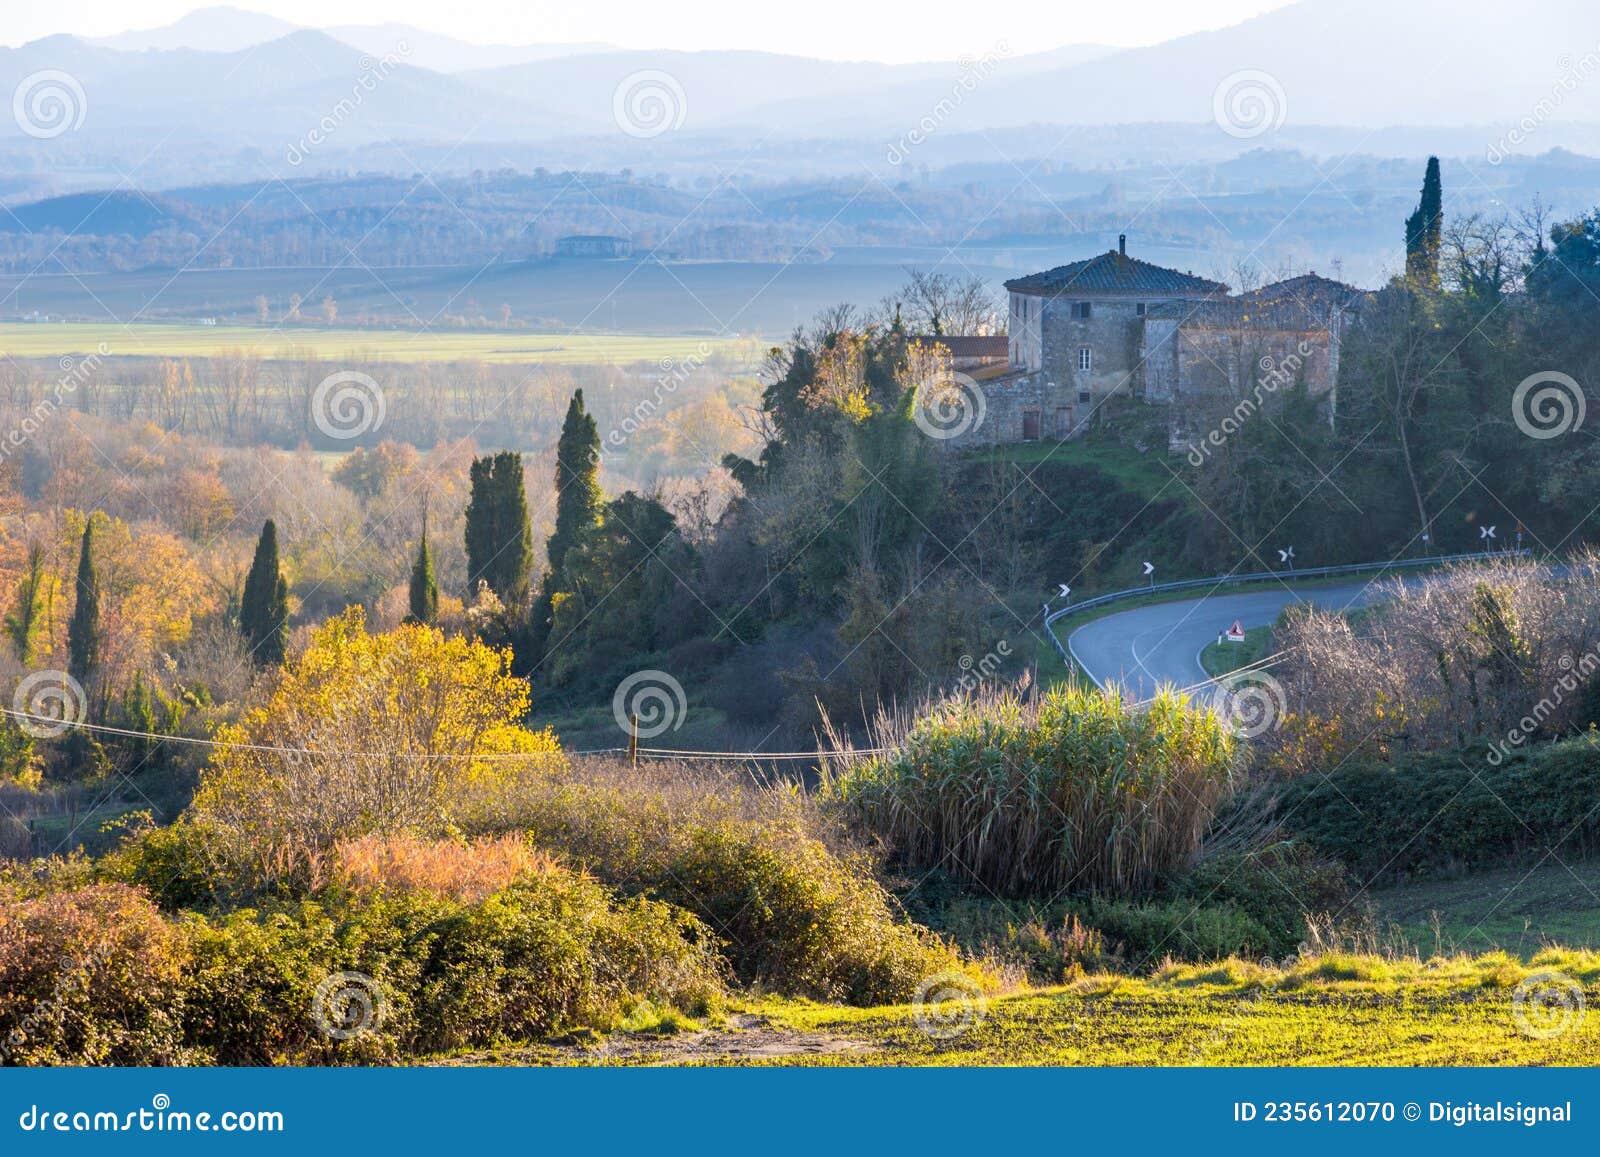 beautiful view of country hills in fall near frosini, siena province, italy